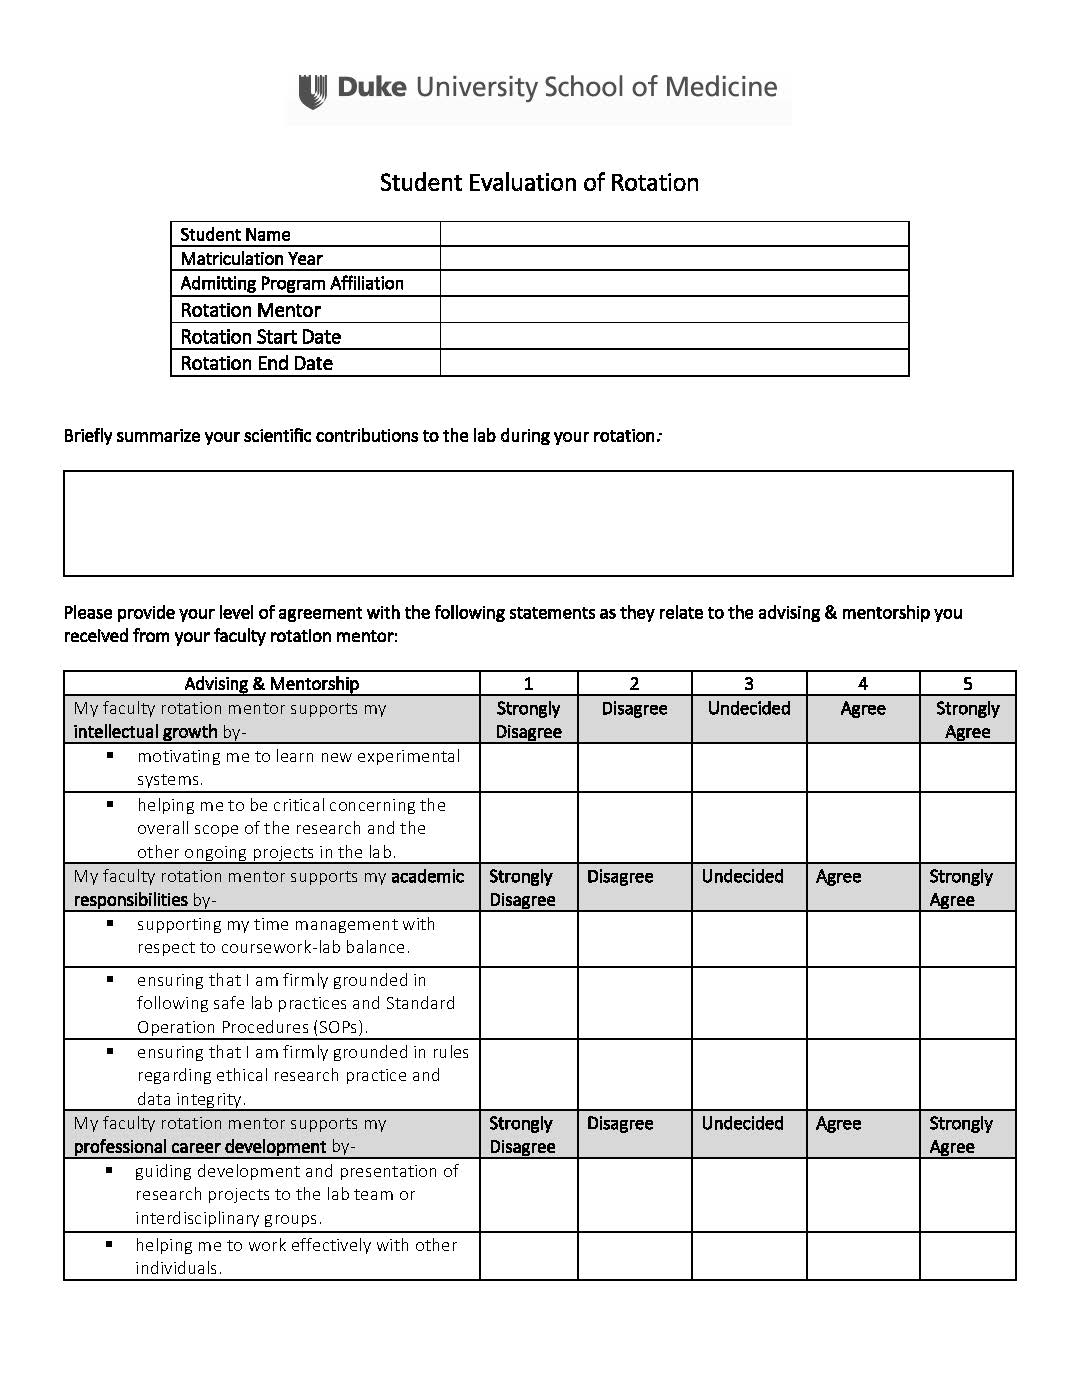 Student Evaluation of Rotation page 1